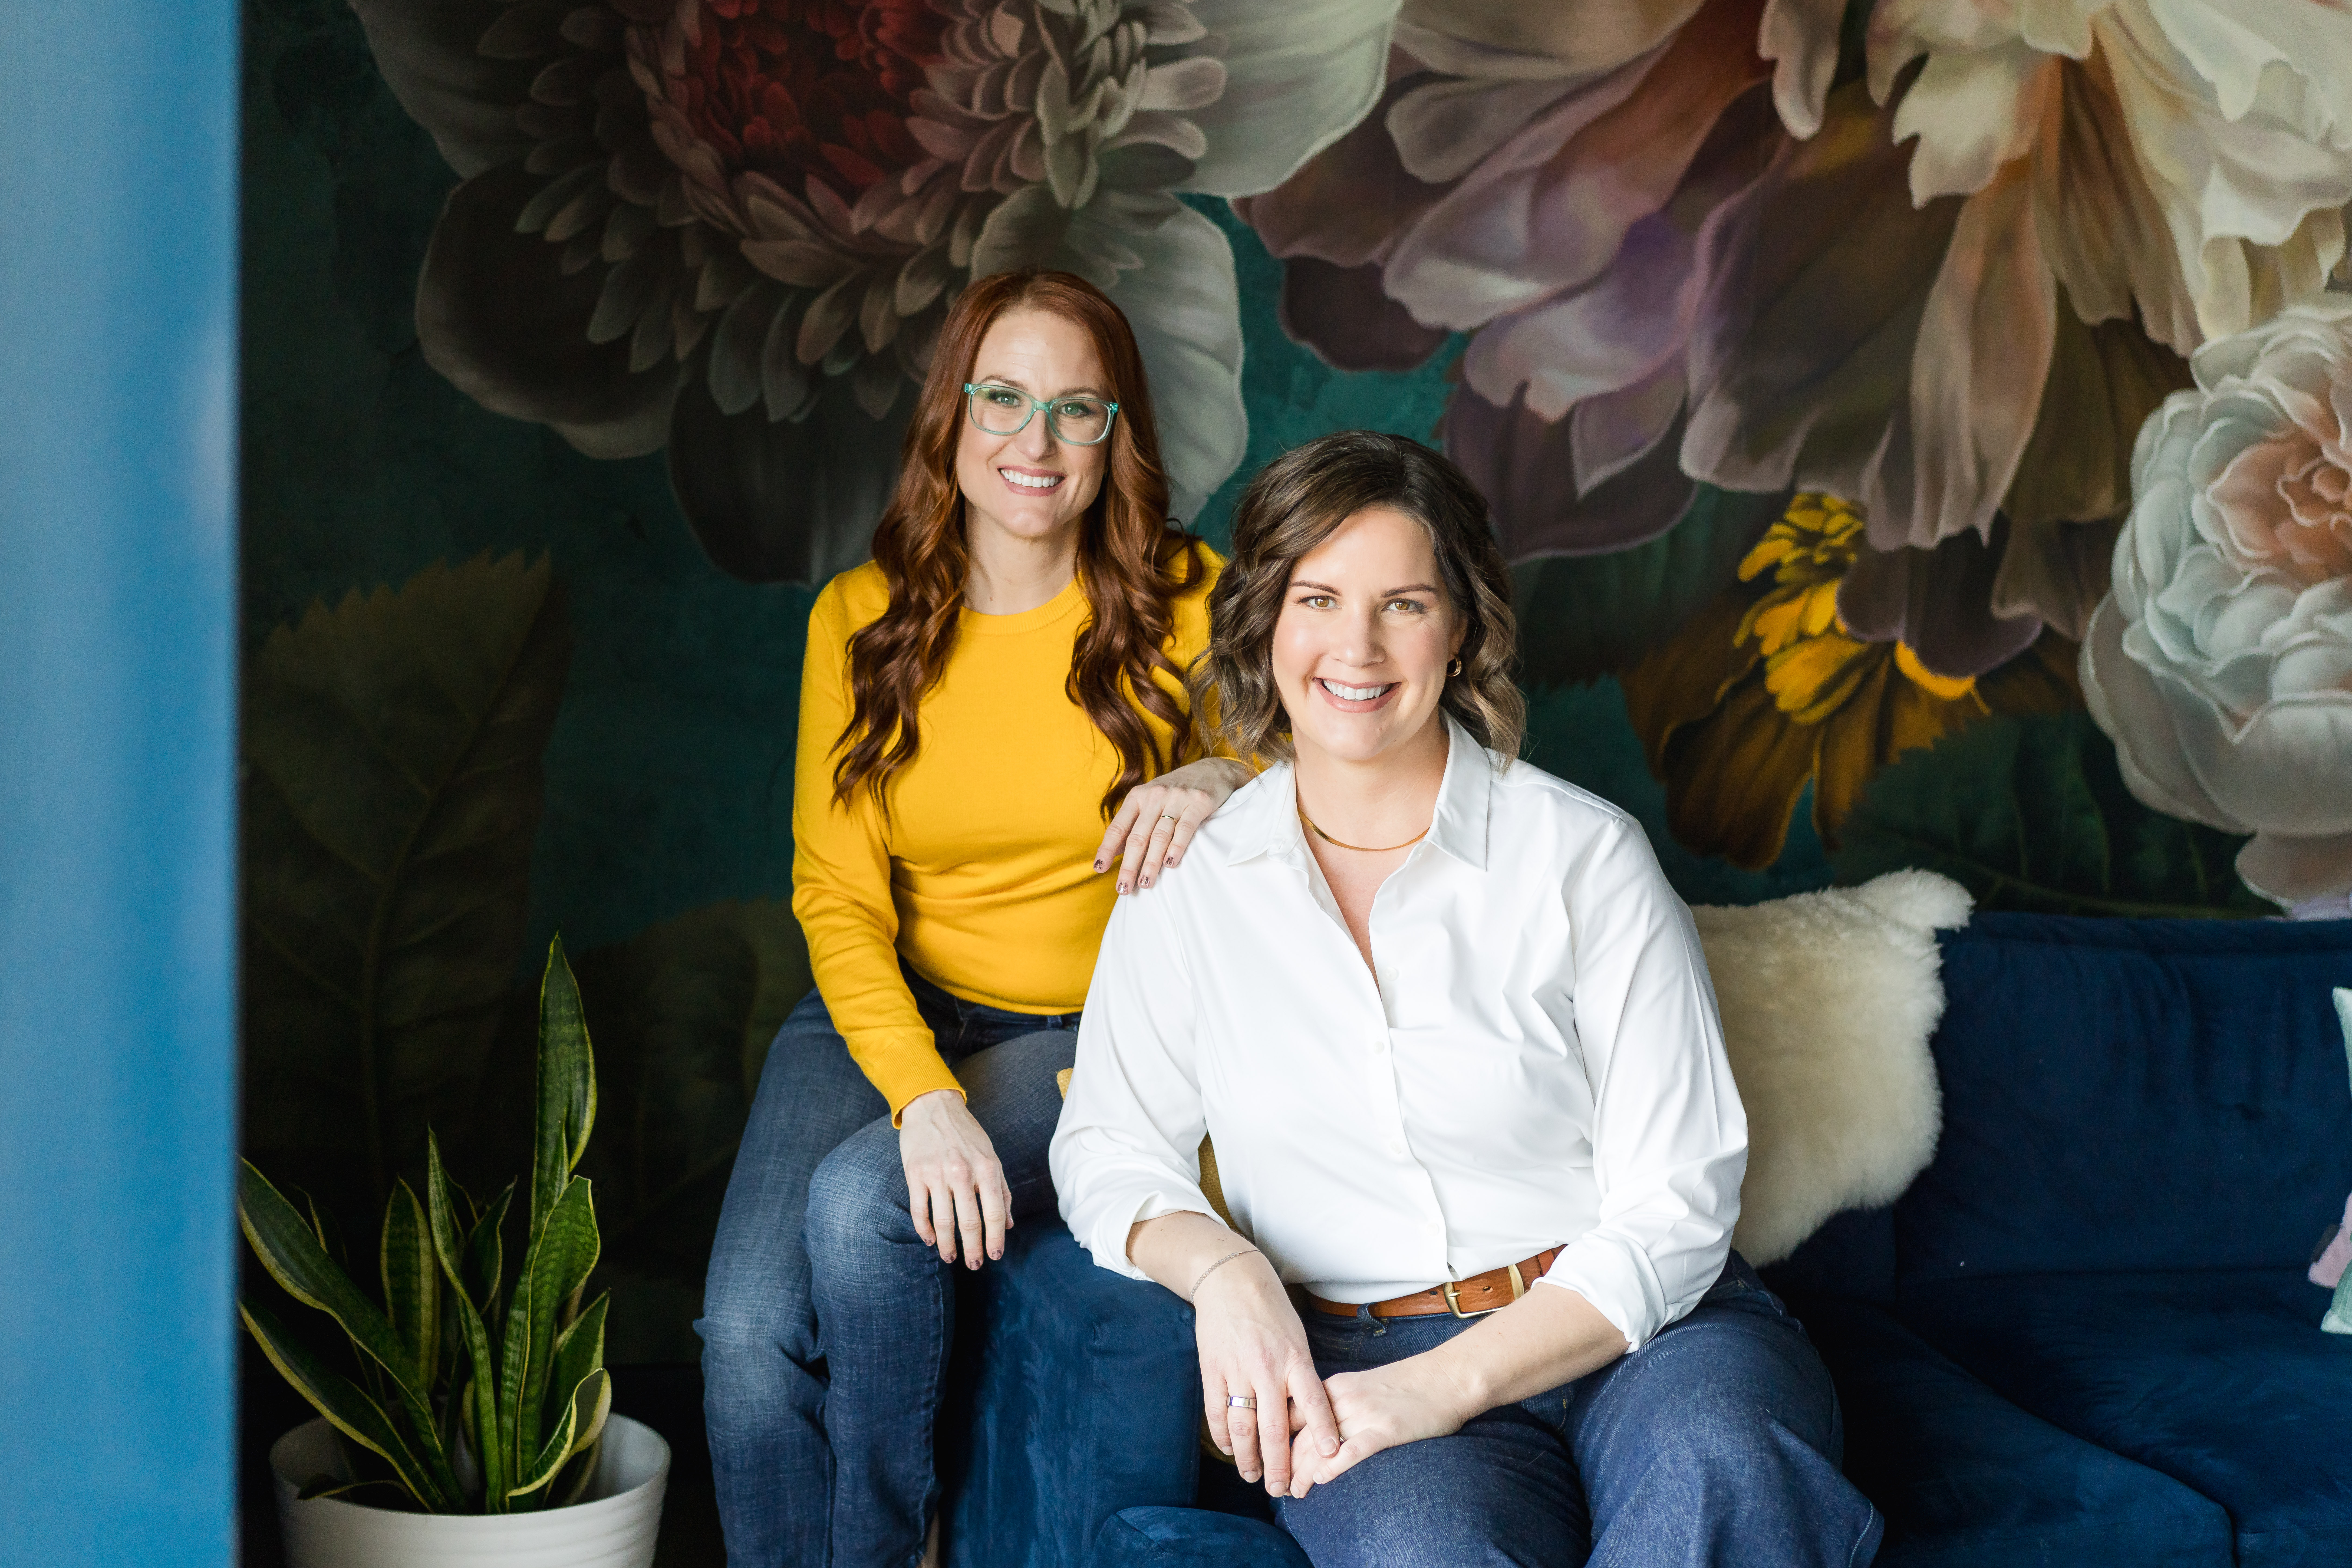 Two businesswomen sitting together for updated website branding photos